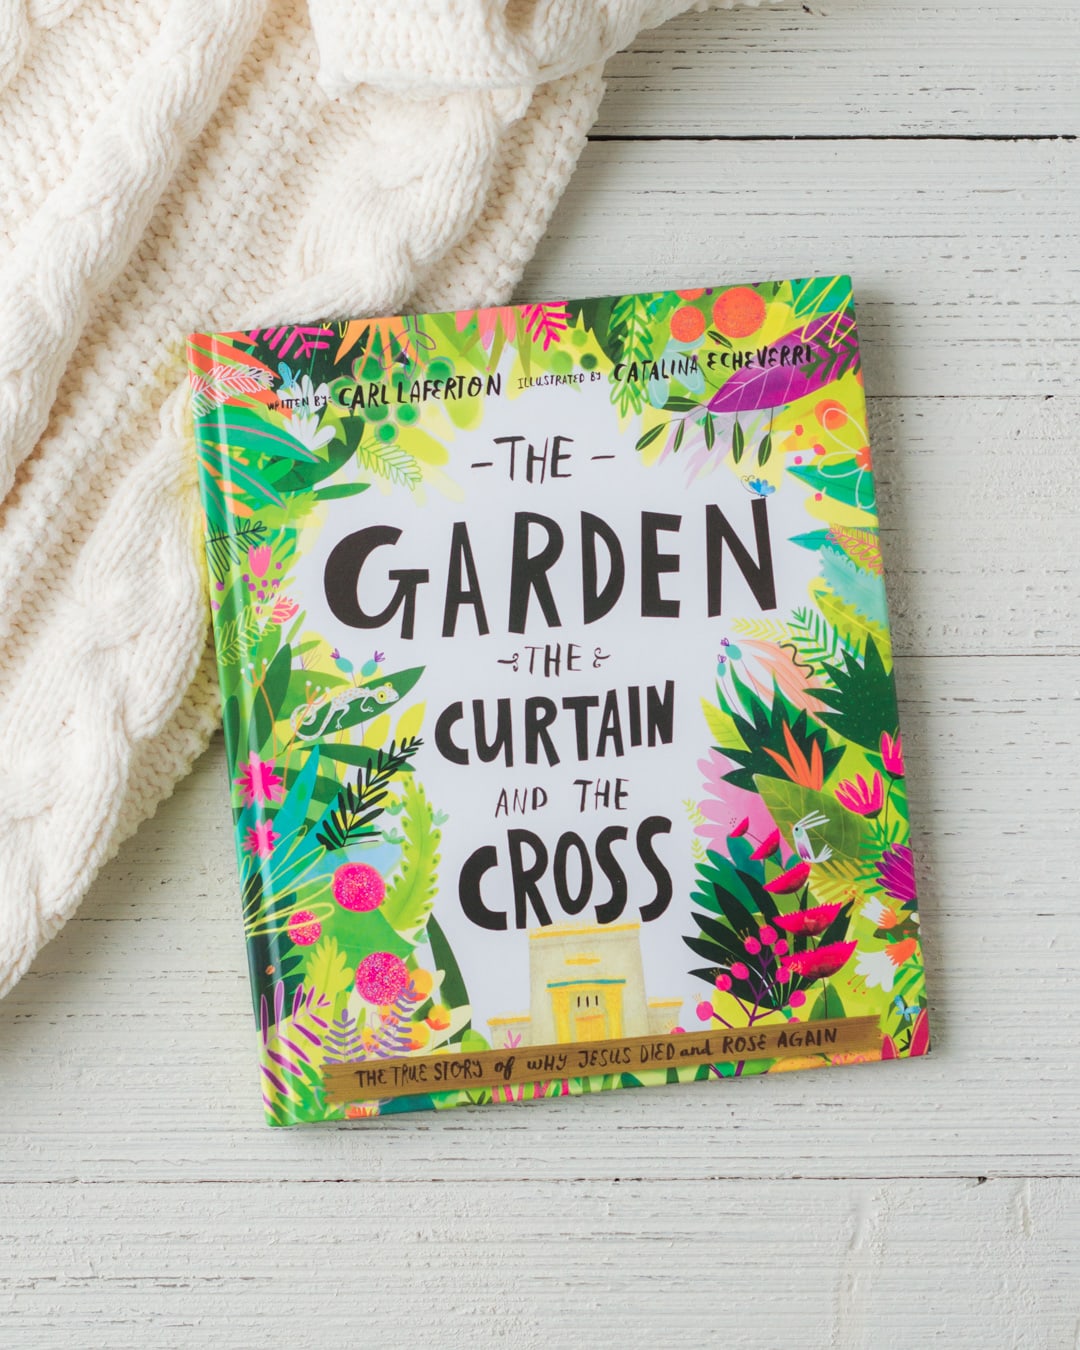 The Garden, the Curtain, and the Cross book on a wooden background.